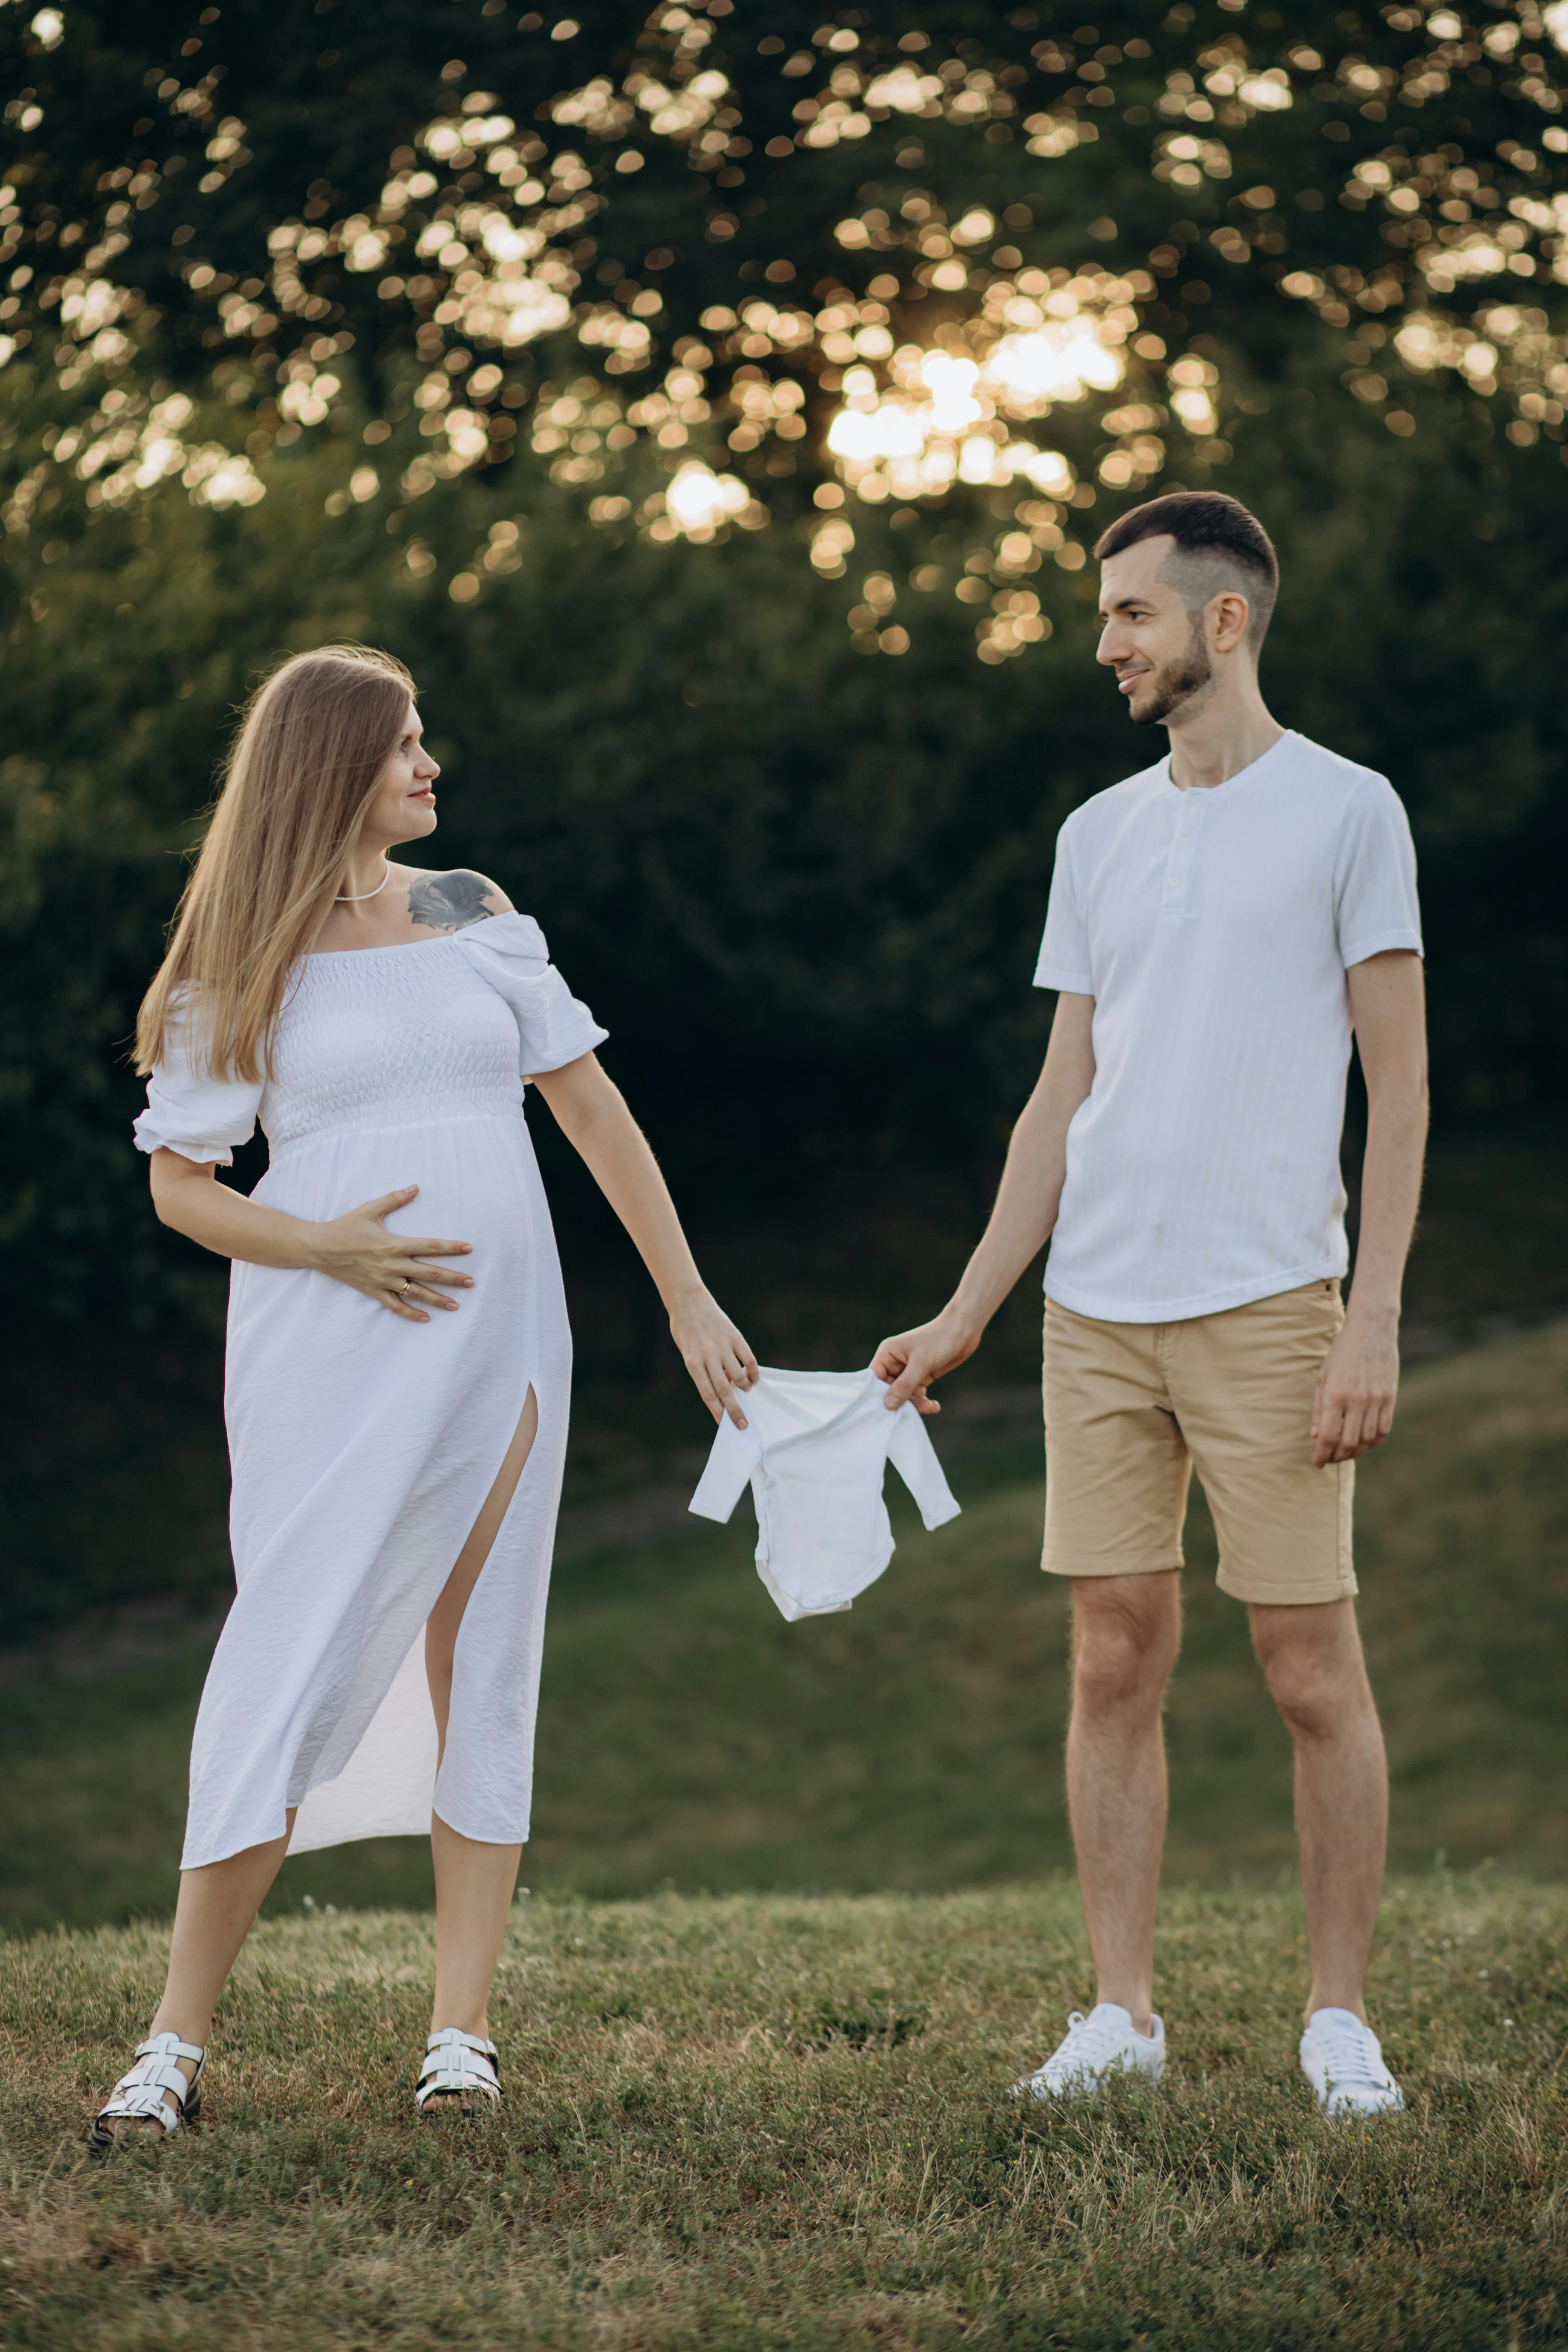 Image of Mother To Be Wife Holding Her Belly By Both Hands, Father Stay  Behind And Gives Thumbs-Up Gesture, Happy Couple Posing For A Photo Outdoor  Evening Time, Couple Goals Concept,-VE620575-Picxy